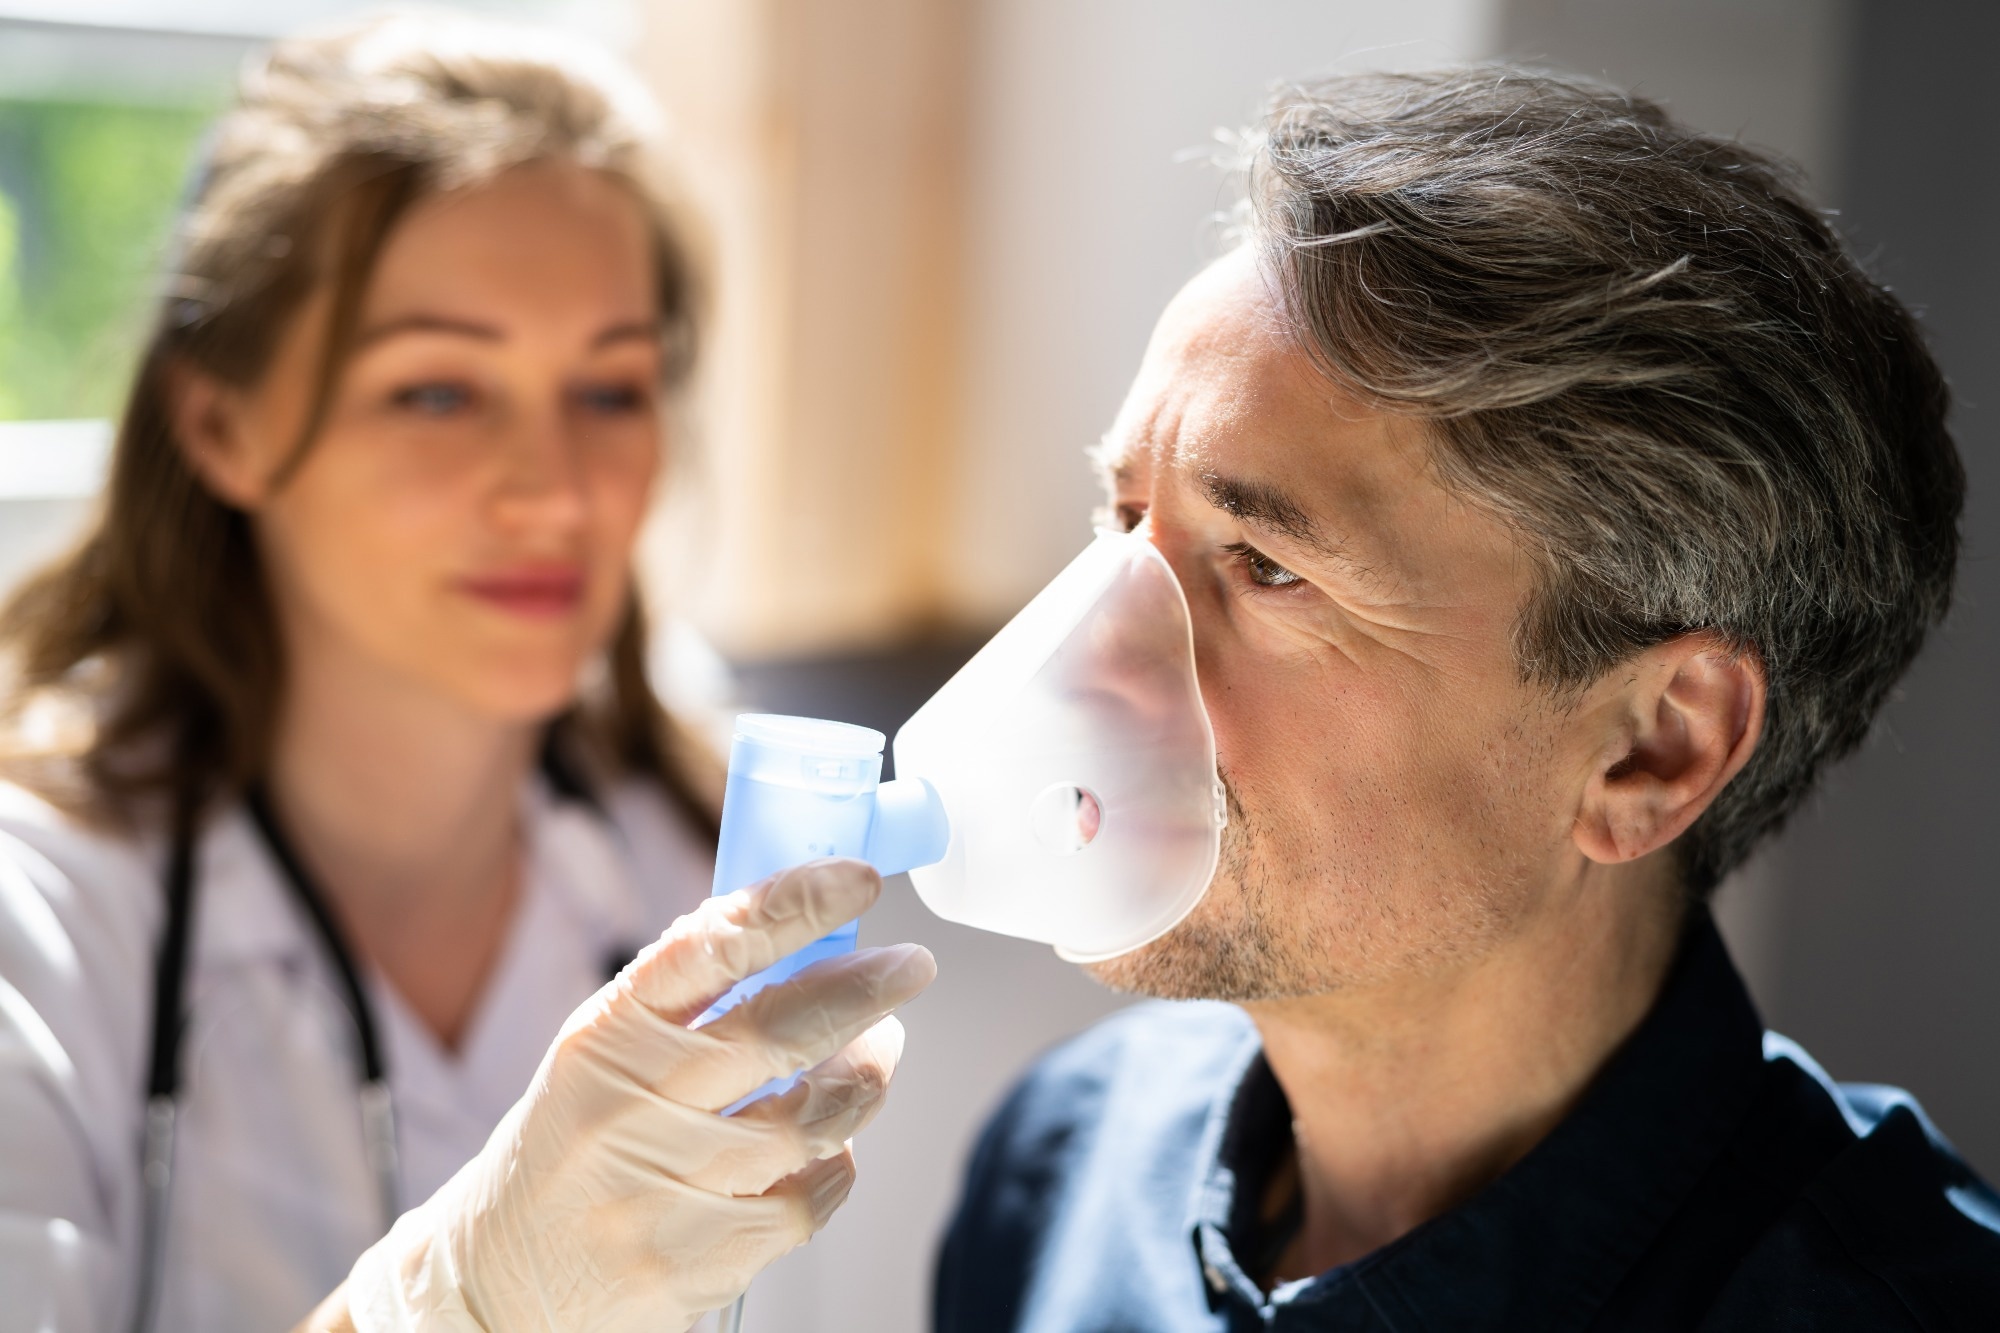 Study: Mechanisms of airway epithelial injury and abnormal repair in asthma and COPD. Image Credit: Andrey_Popov/Shutterstock.com